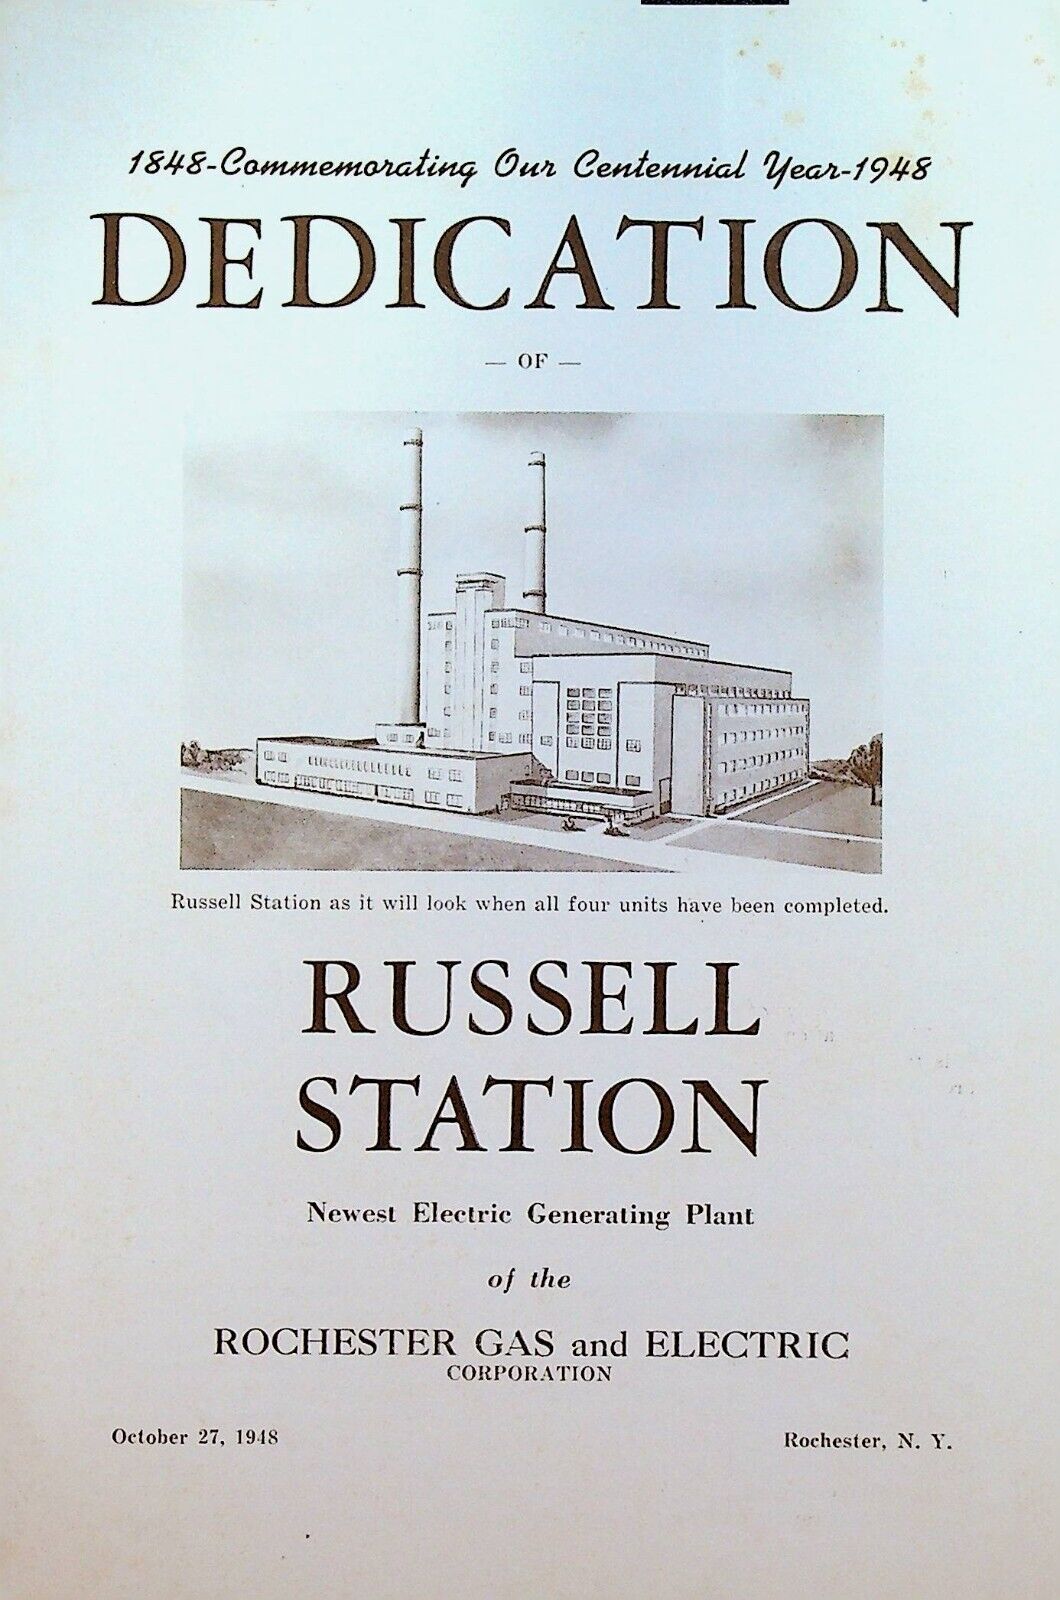 RGE Russell Station Dedication Program 1948 Rochester Gas & Electric